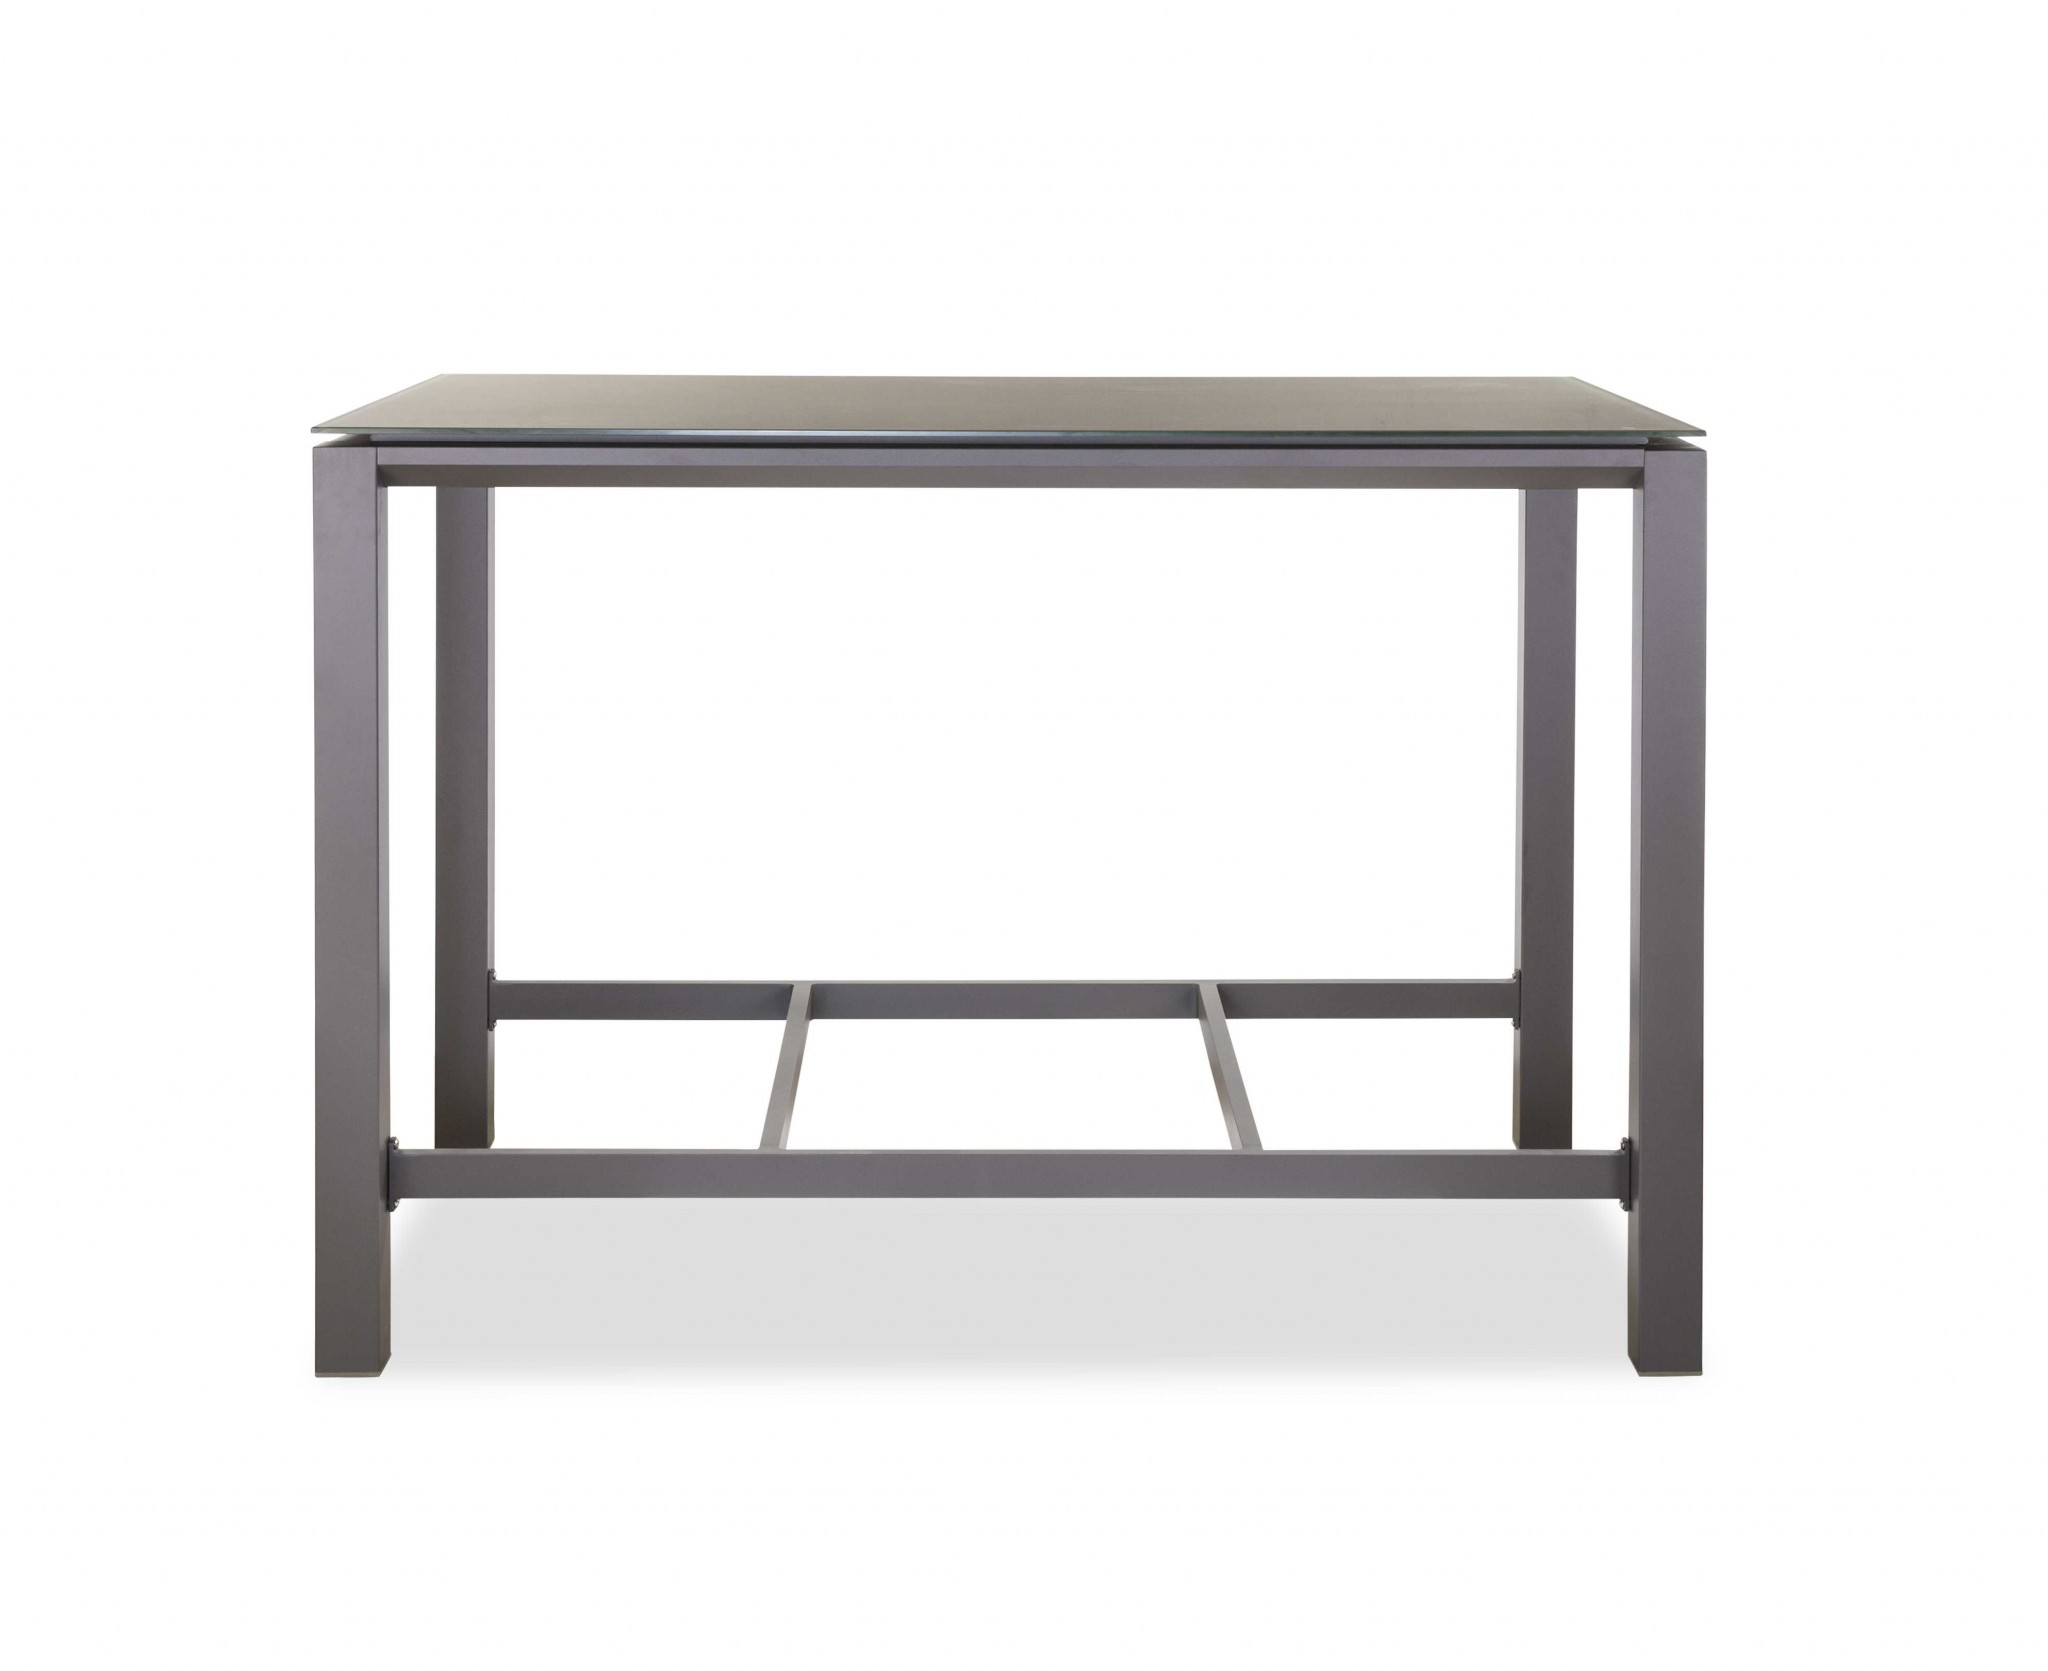 60" X 35" X 41" Taupe Bar Table